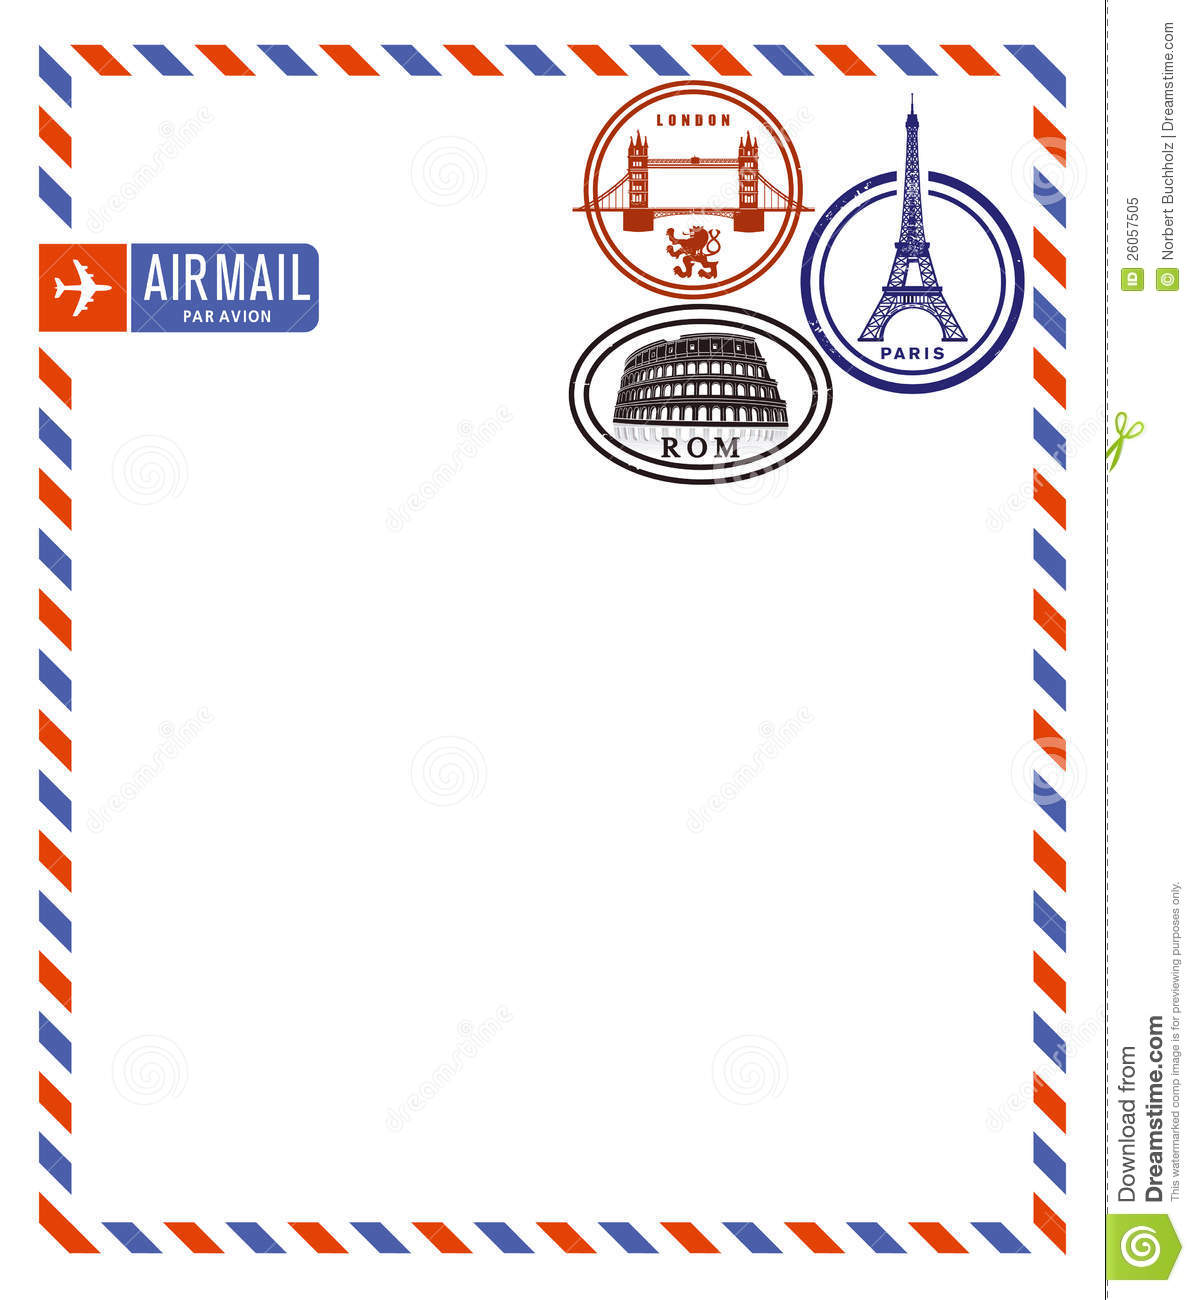 Airmail letter clipart.